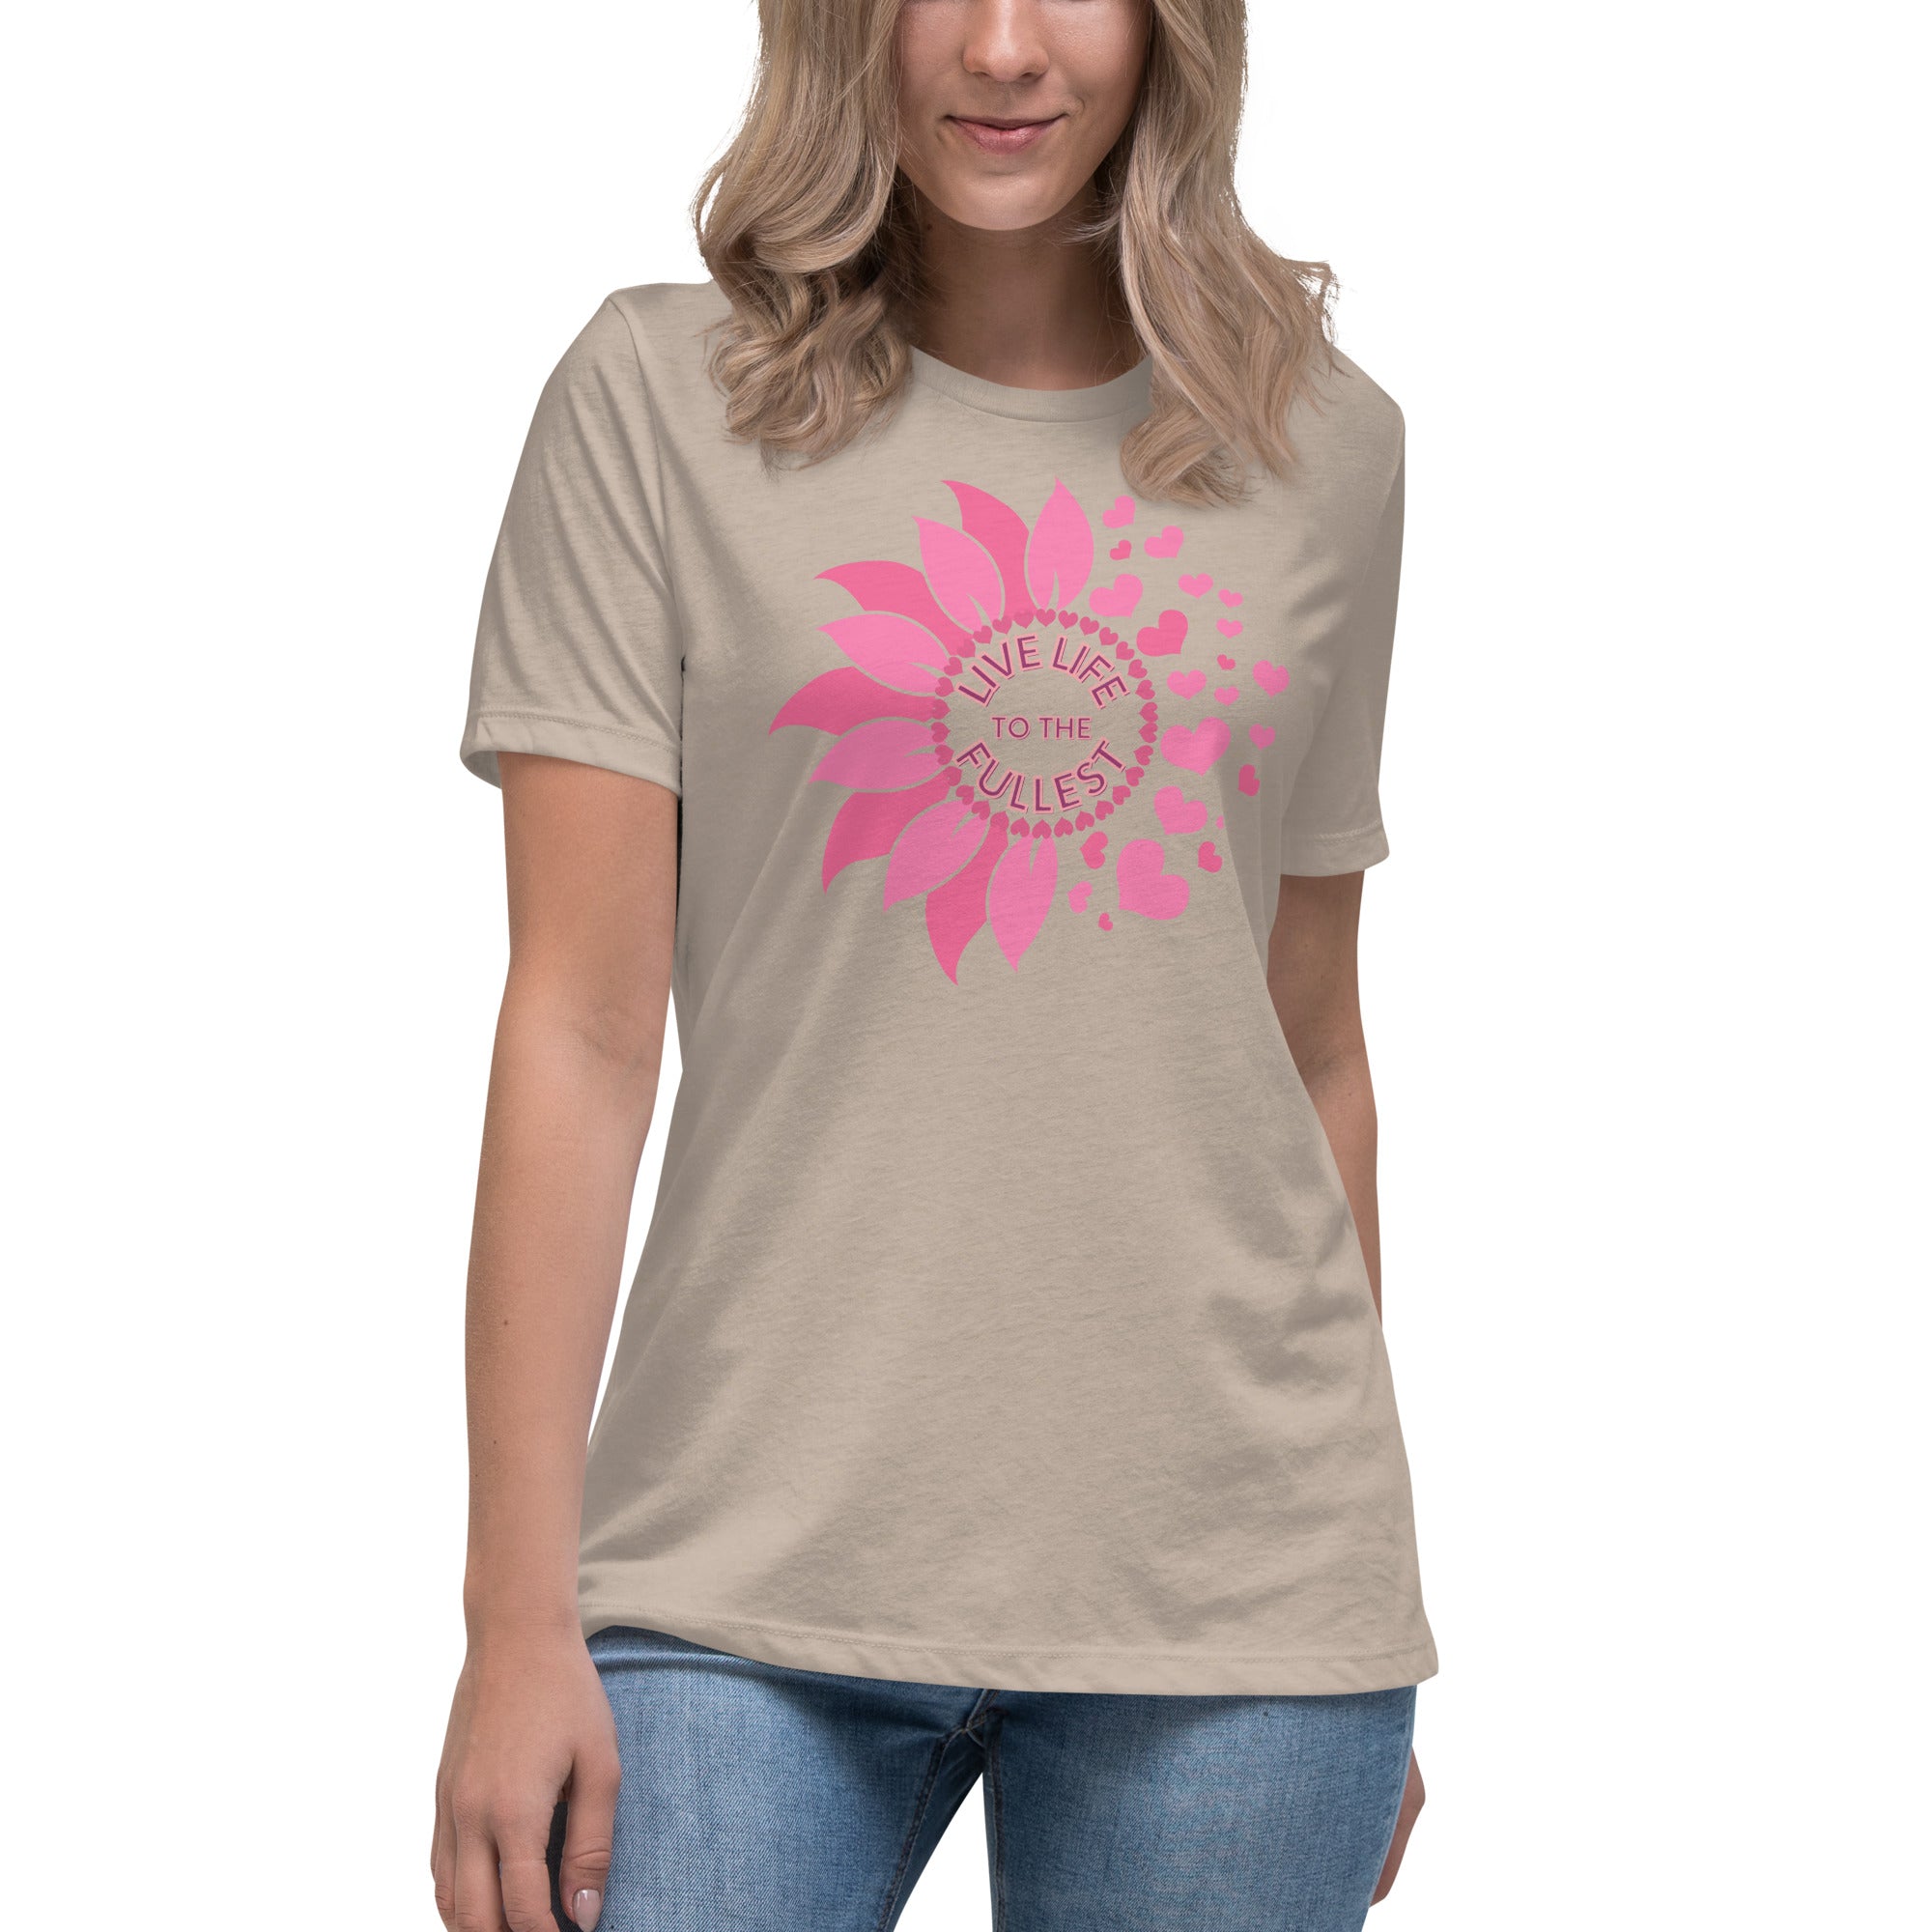 Live Life To The Fullest Women's Relaxed T-Shirt